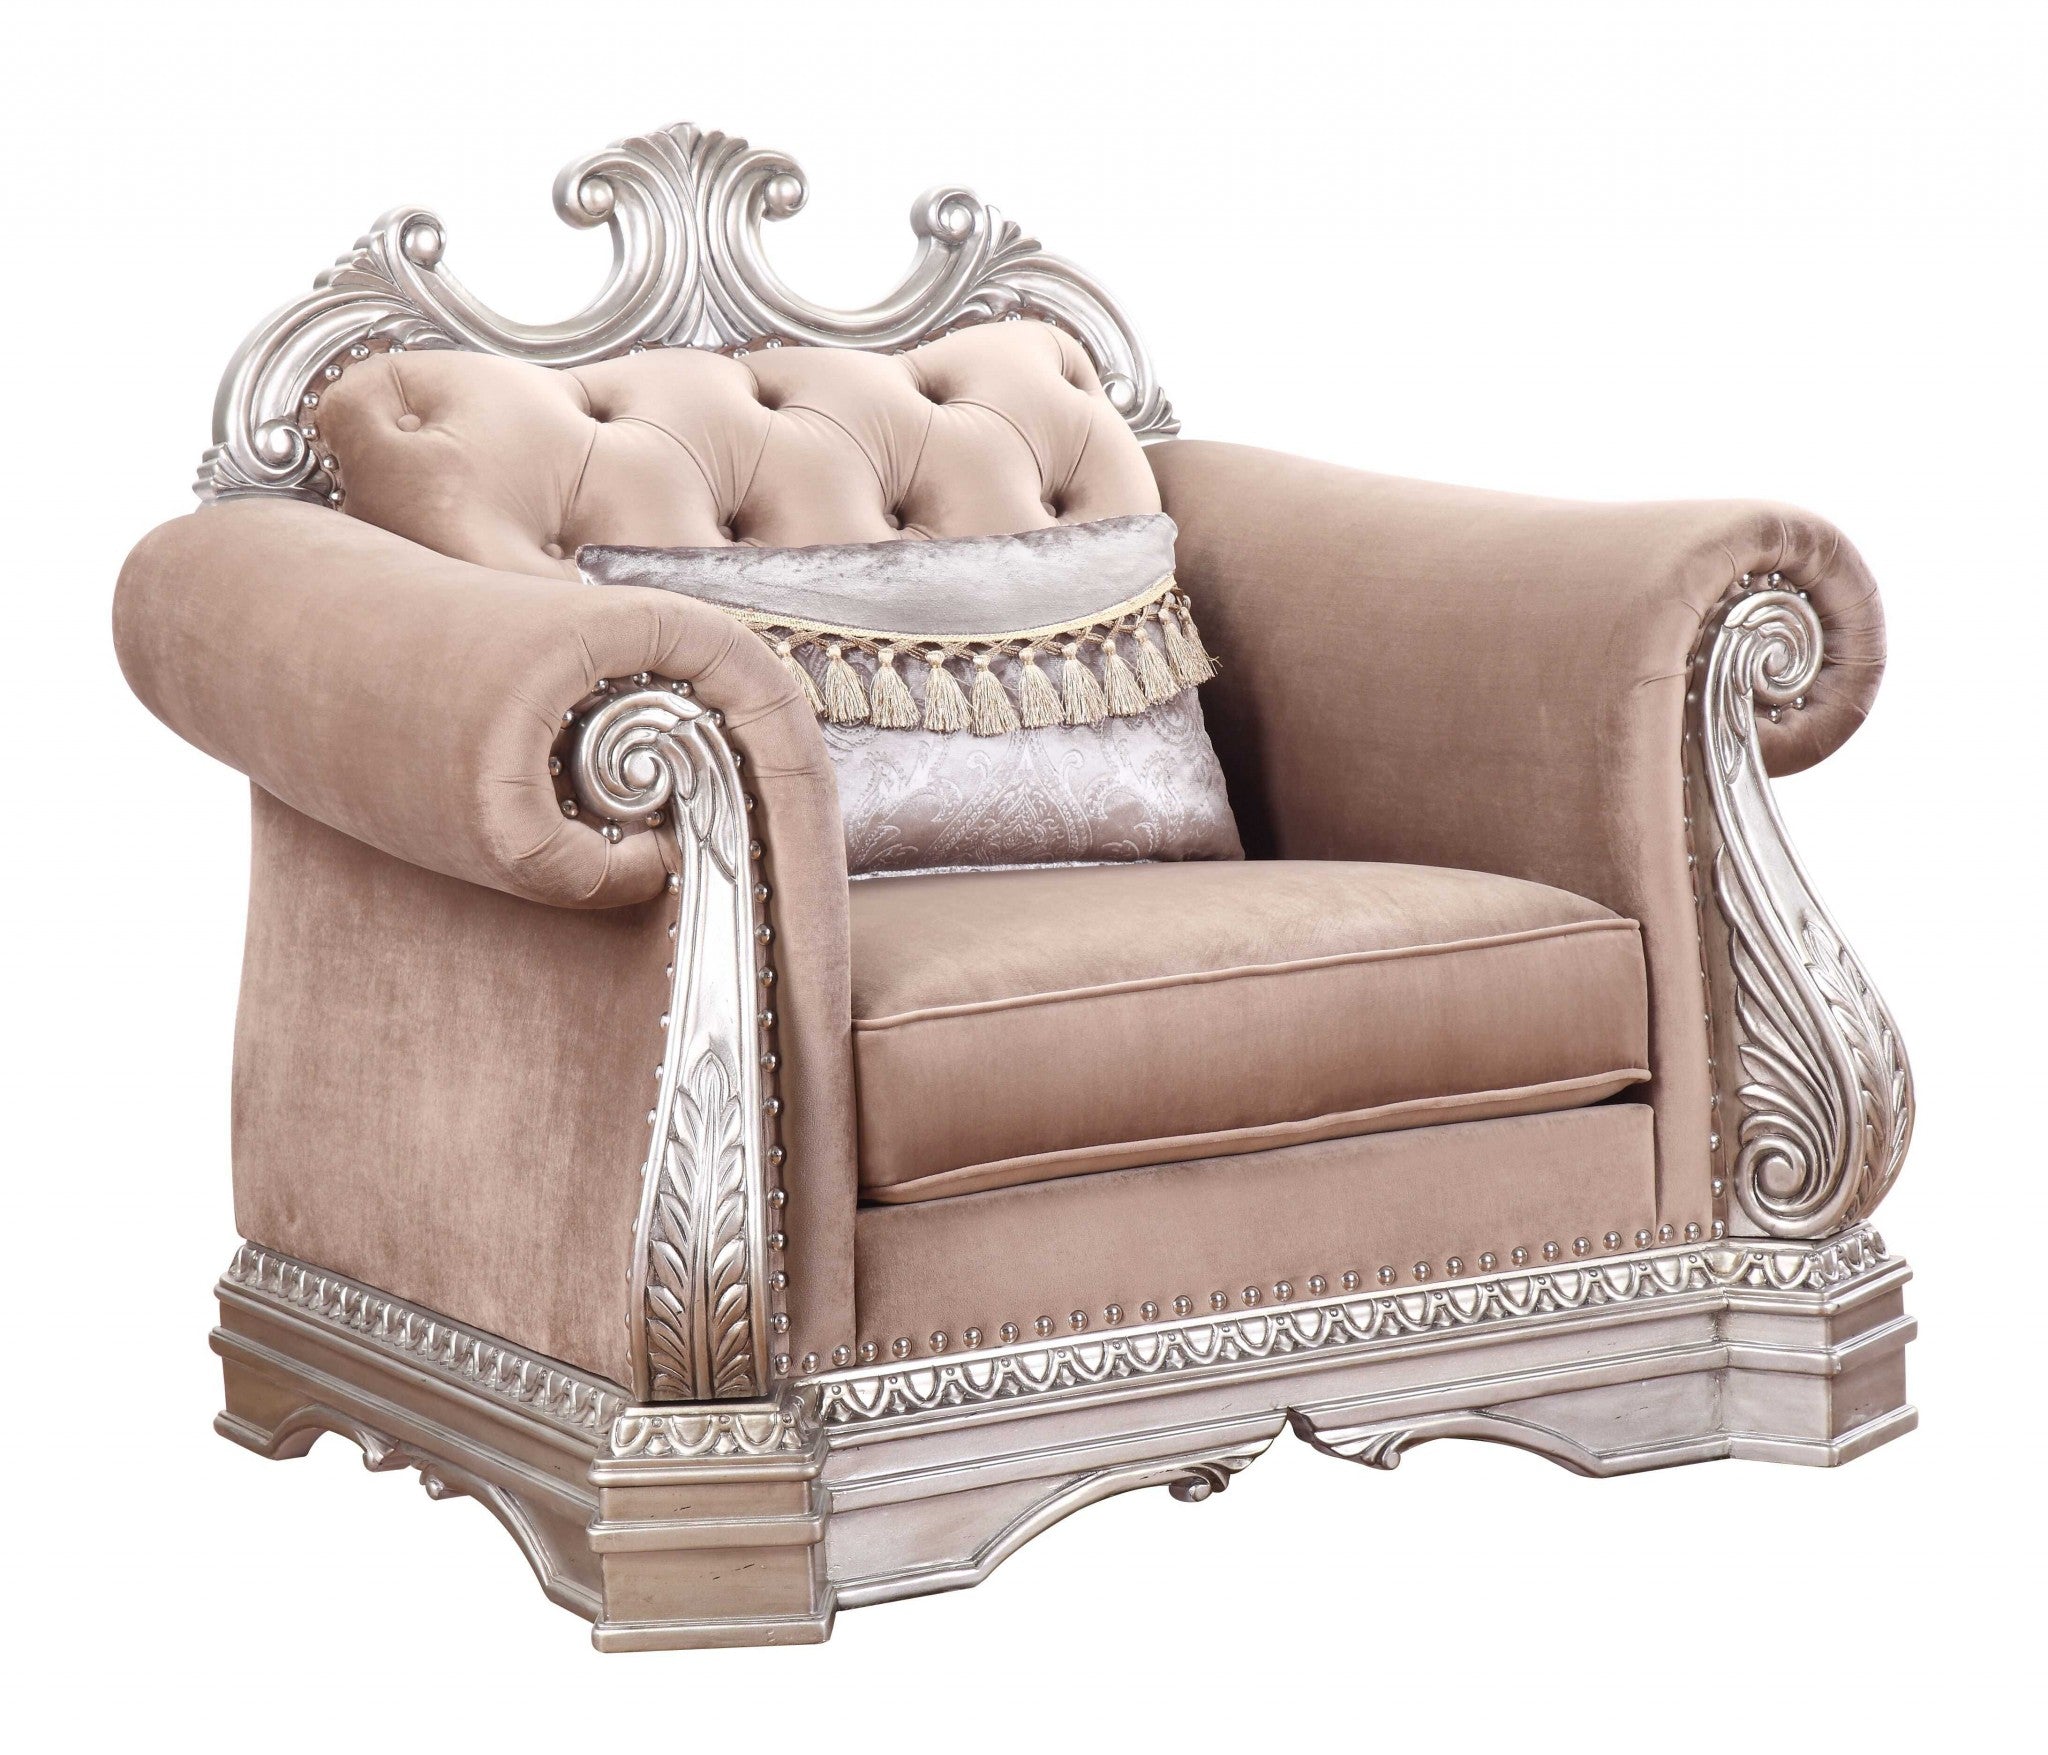 42" Cherry Blossom Pink And Gray Velvet Tufted Chesterfield Chair